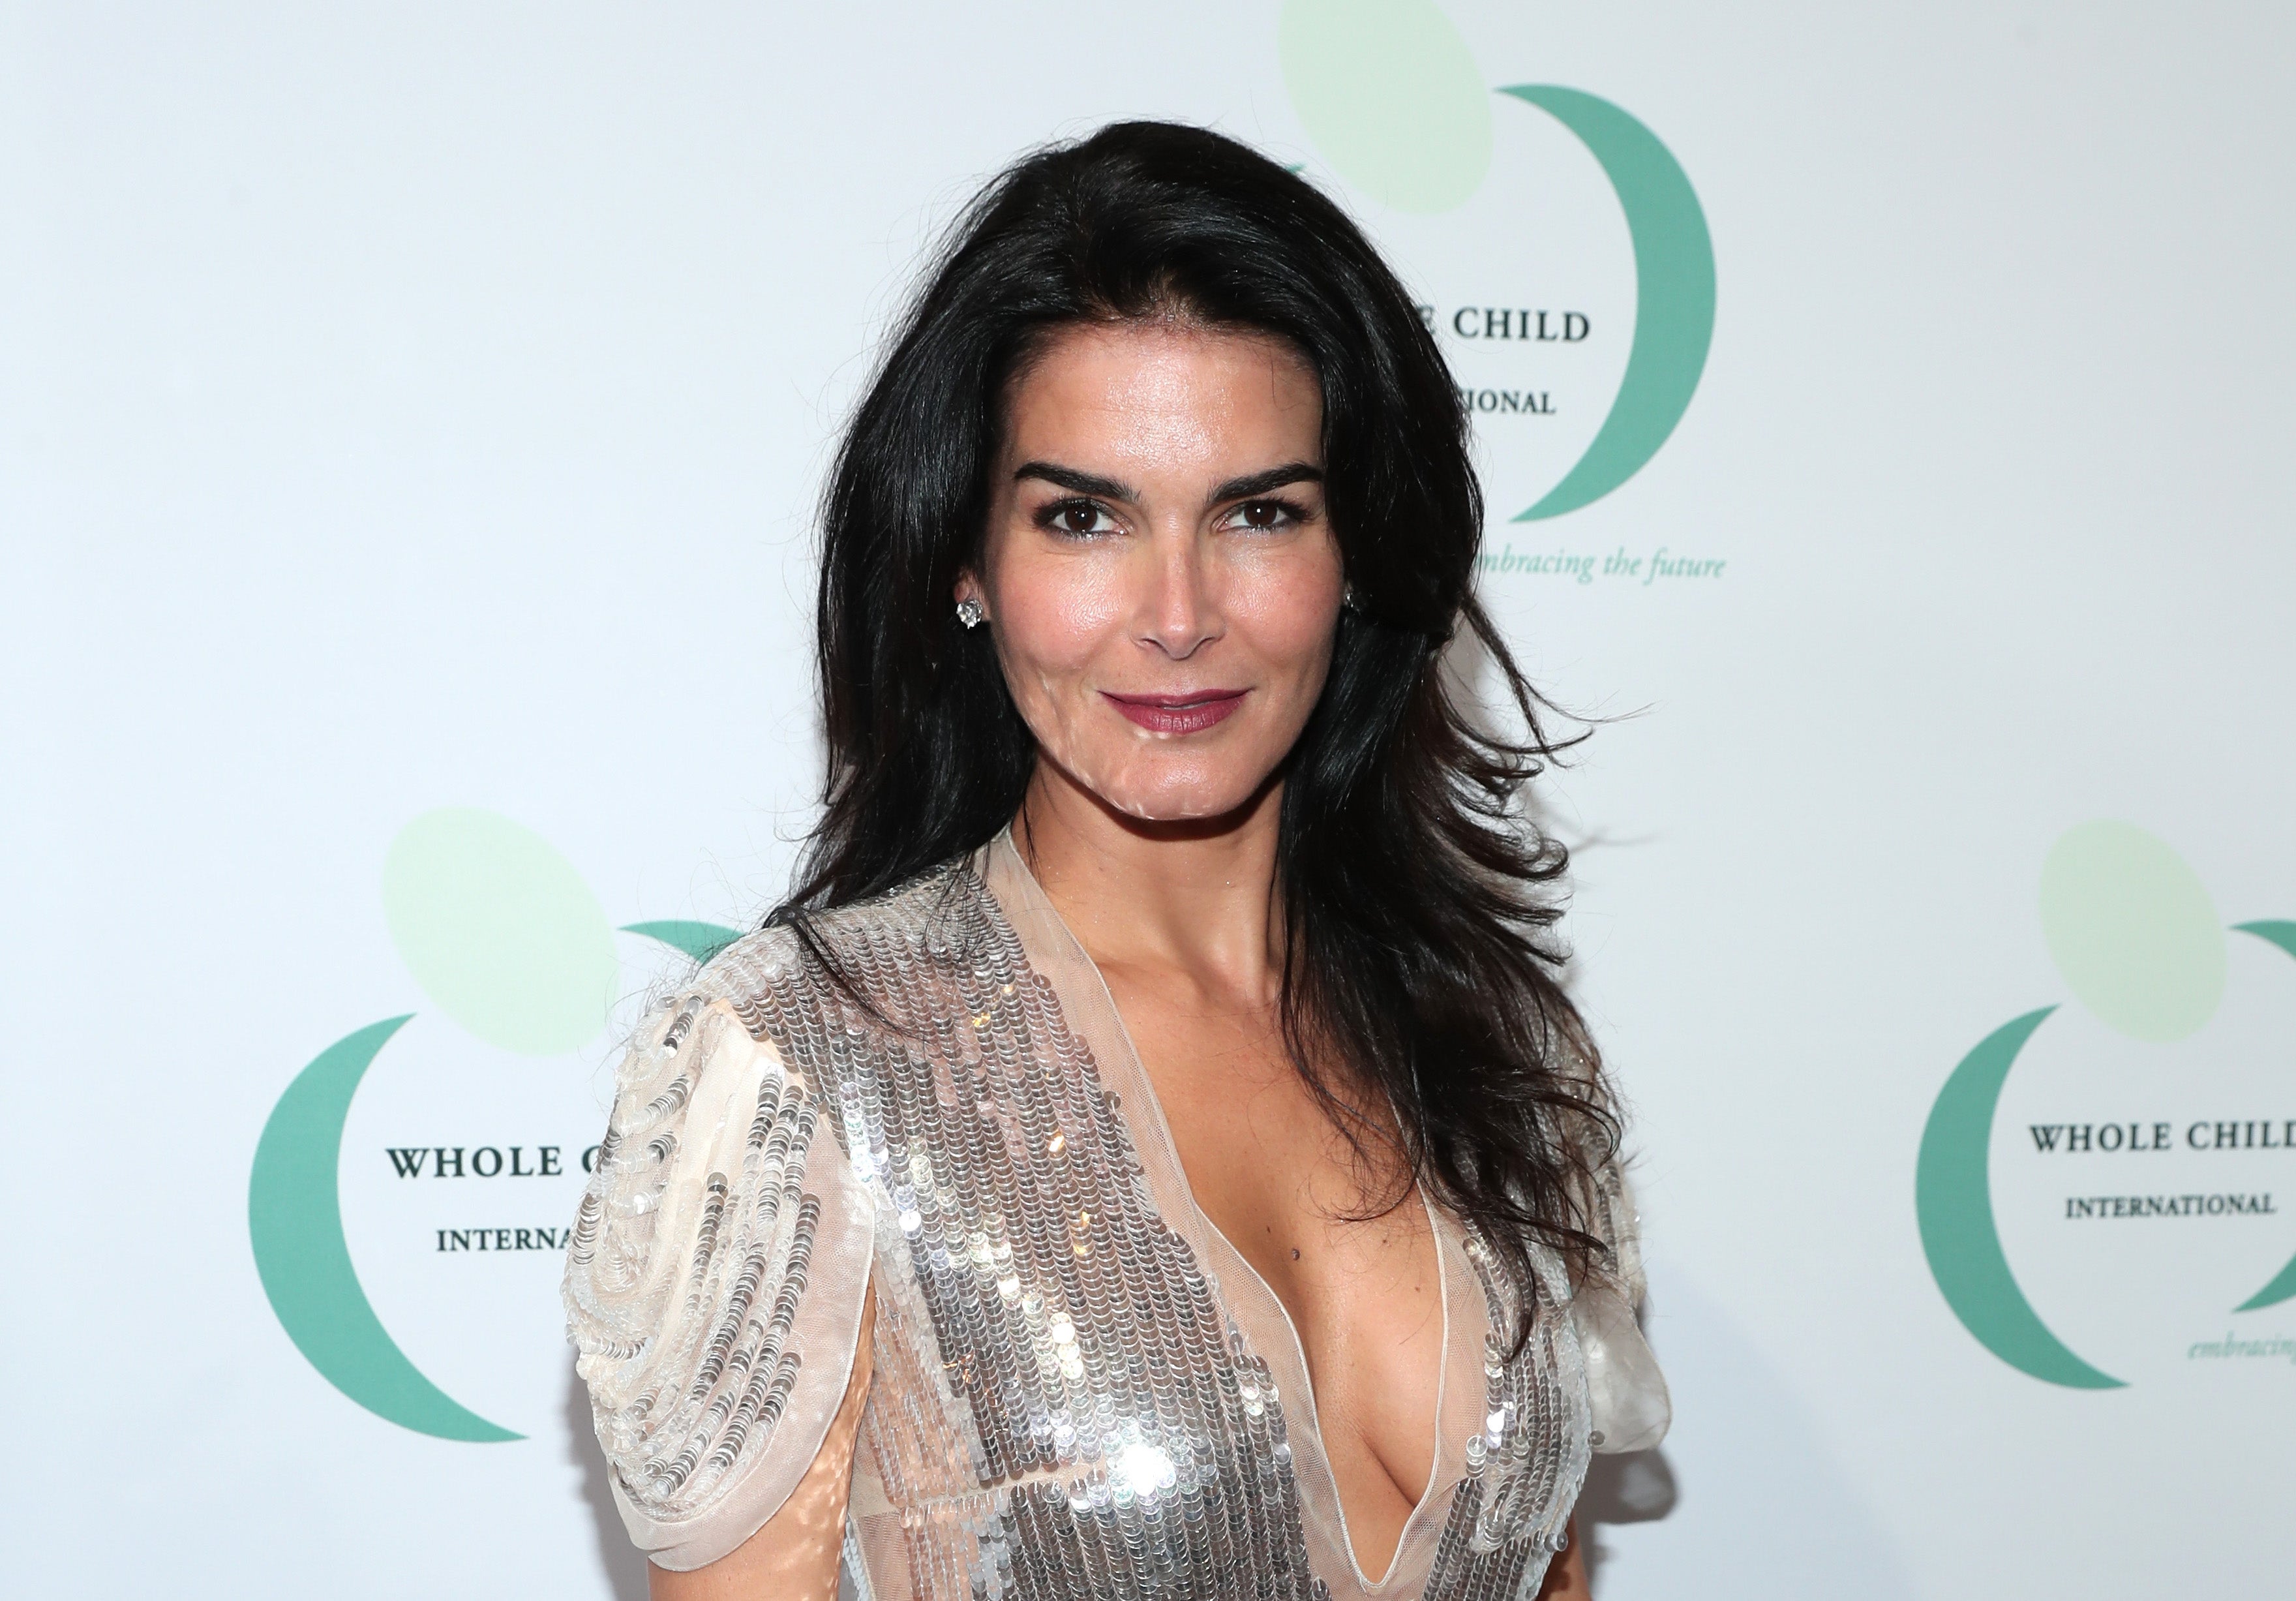 Angie Harmon attends Whole Child International’s Inaugural Gala in 2017